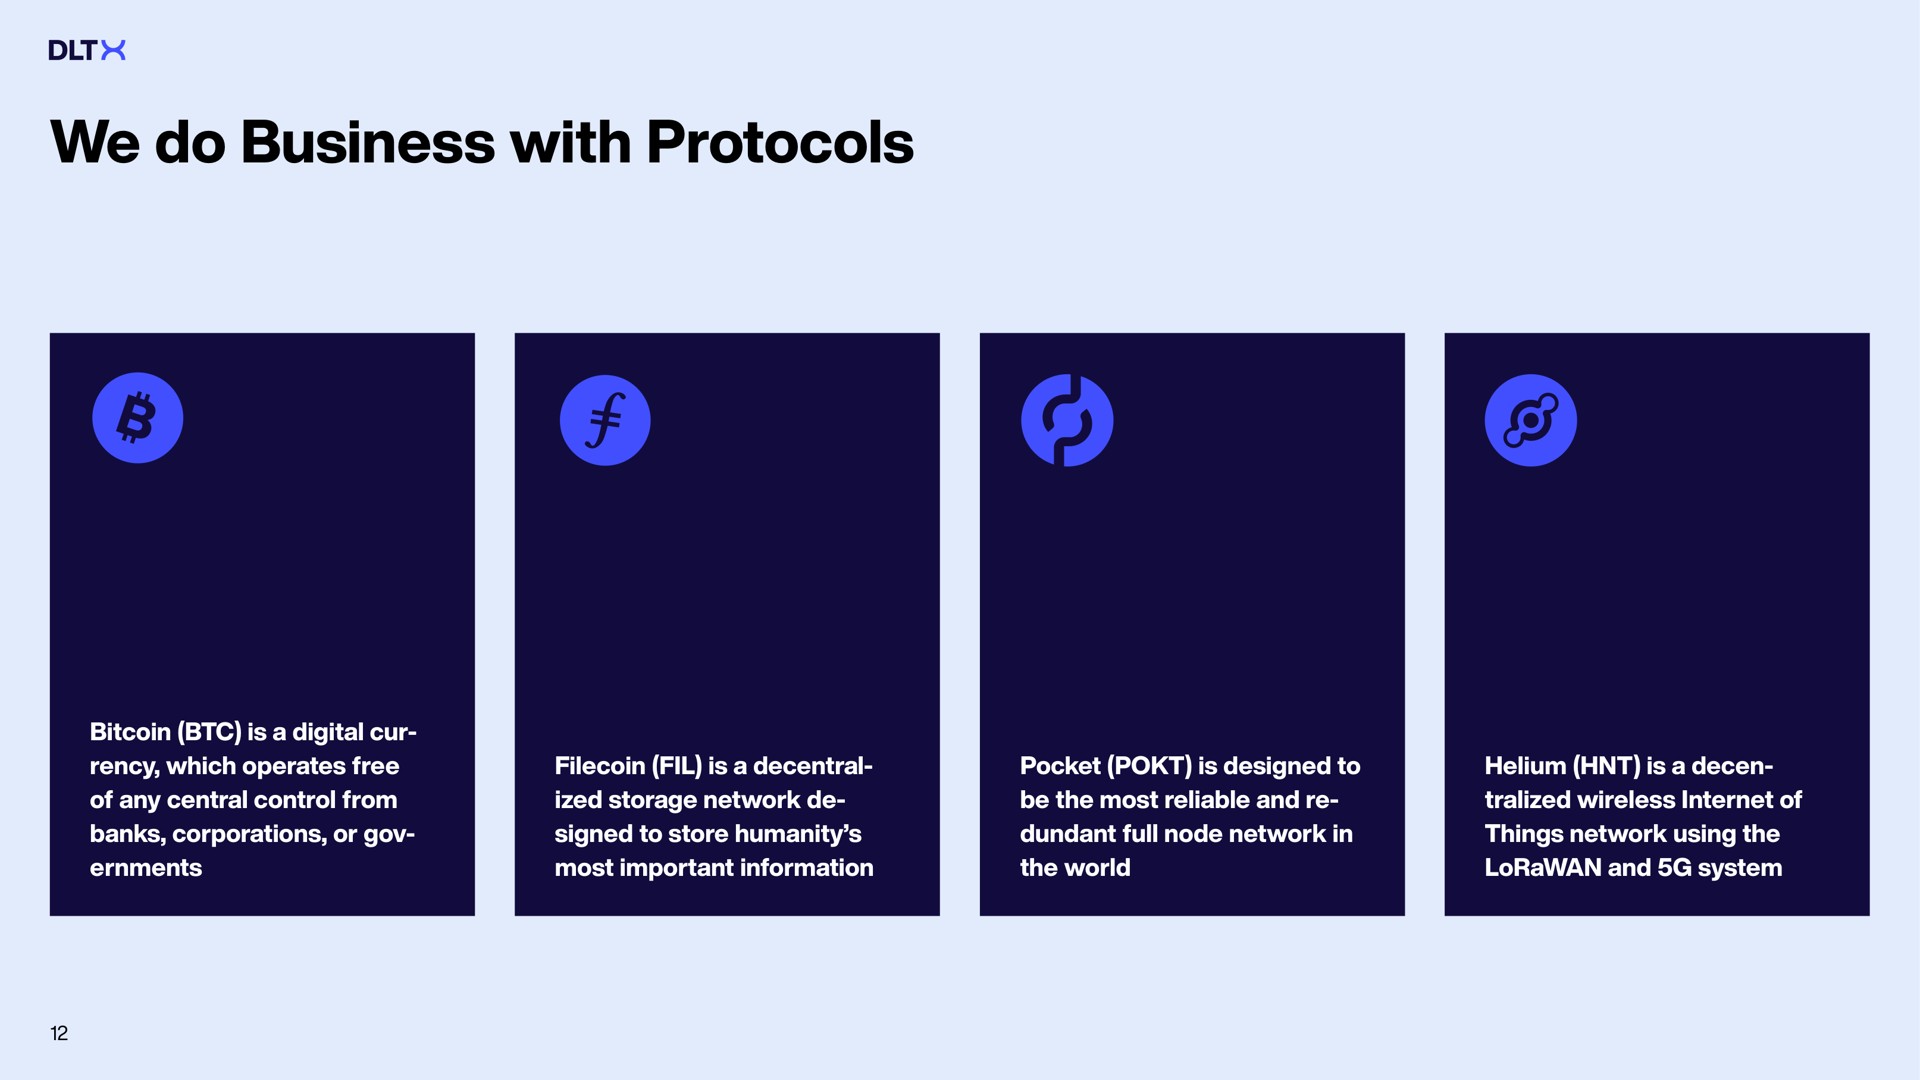 we do business with protocols most important information pocket is designed to and system is a digital cur which operates free of any central control from banks corporations or helium is a wireless of things network using the is a storage network signed to store humanity full node network in be the most reliable and the world | DLTx